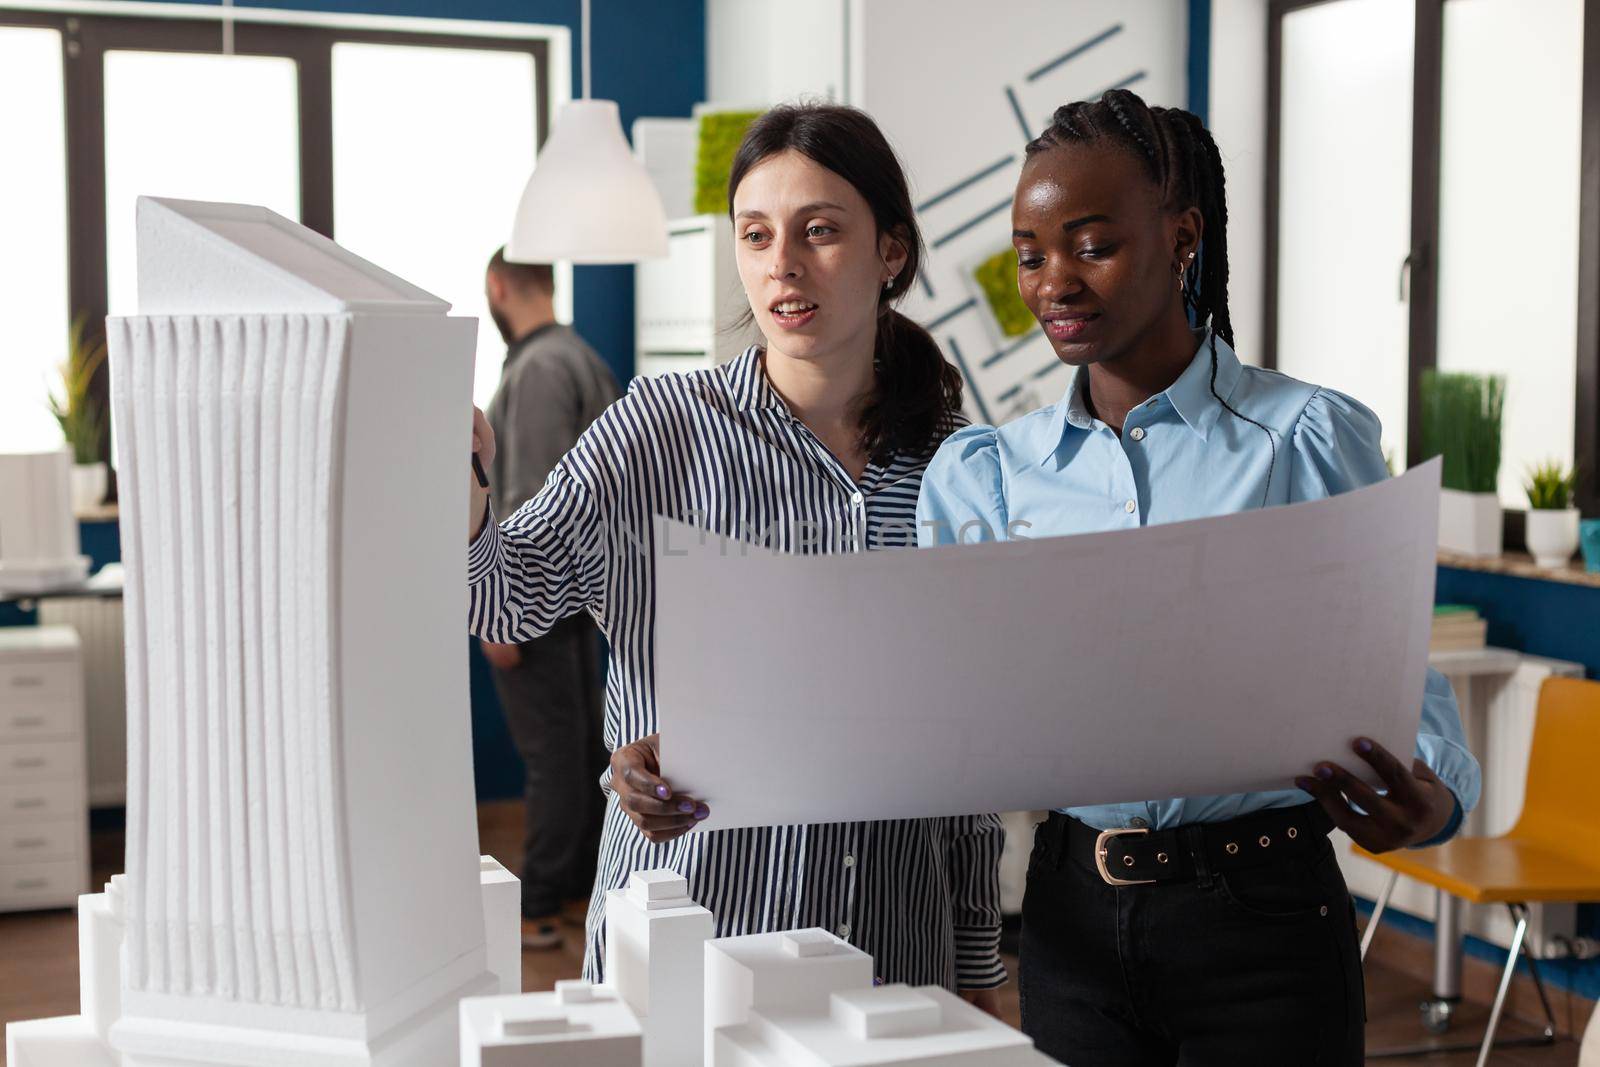 Colleagues architects women checking plans of blueprints layout design. Multi ethnic team of professional workers standing at building model maquette for modern technology project